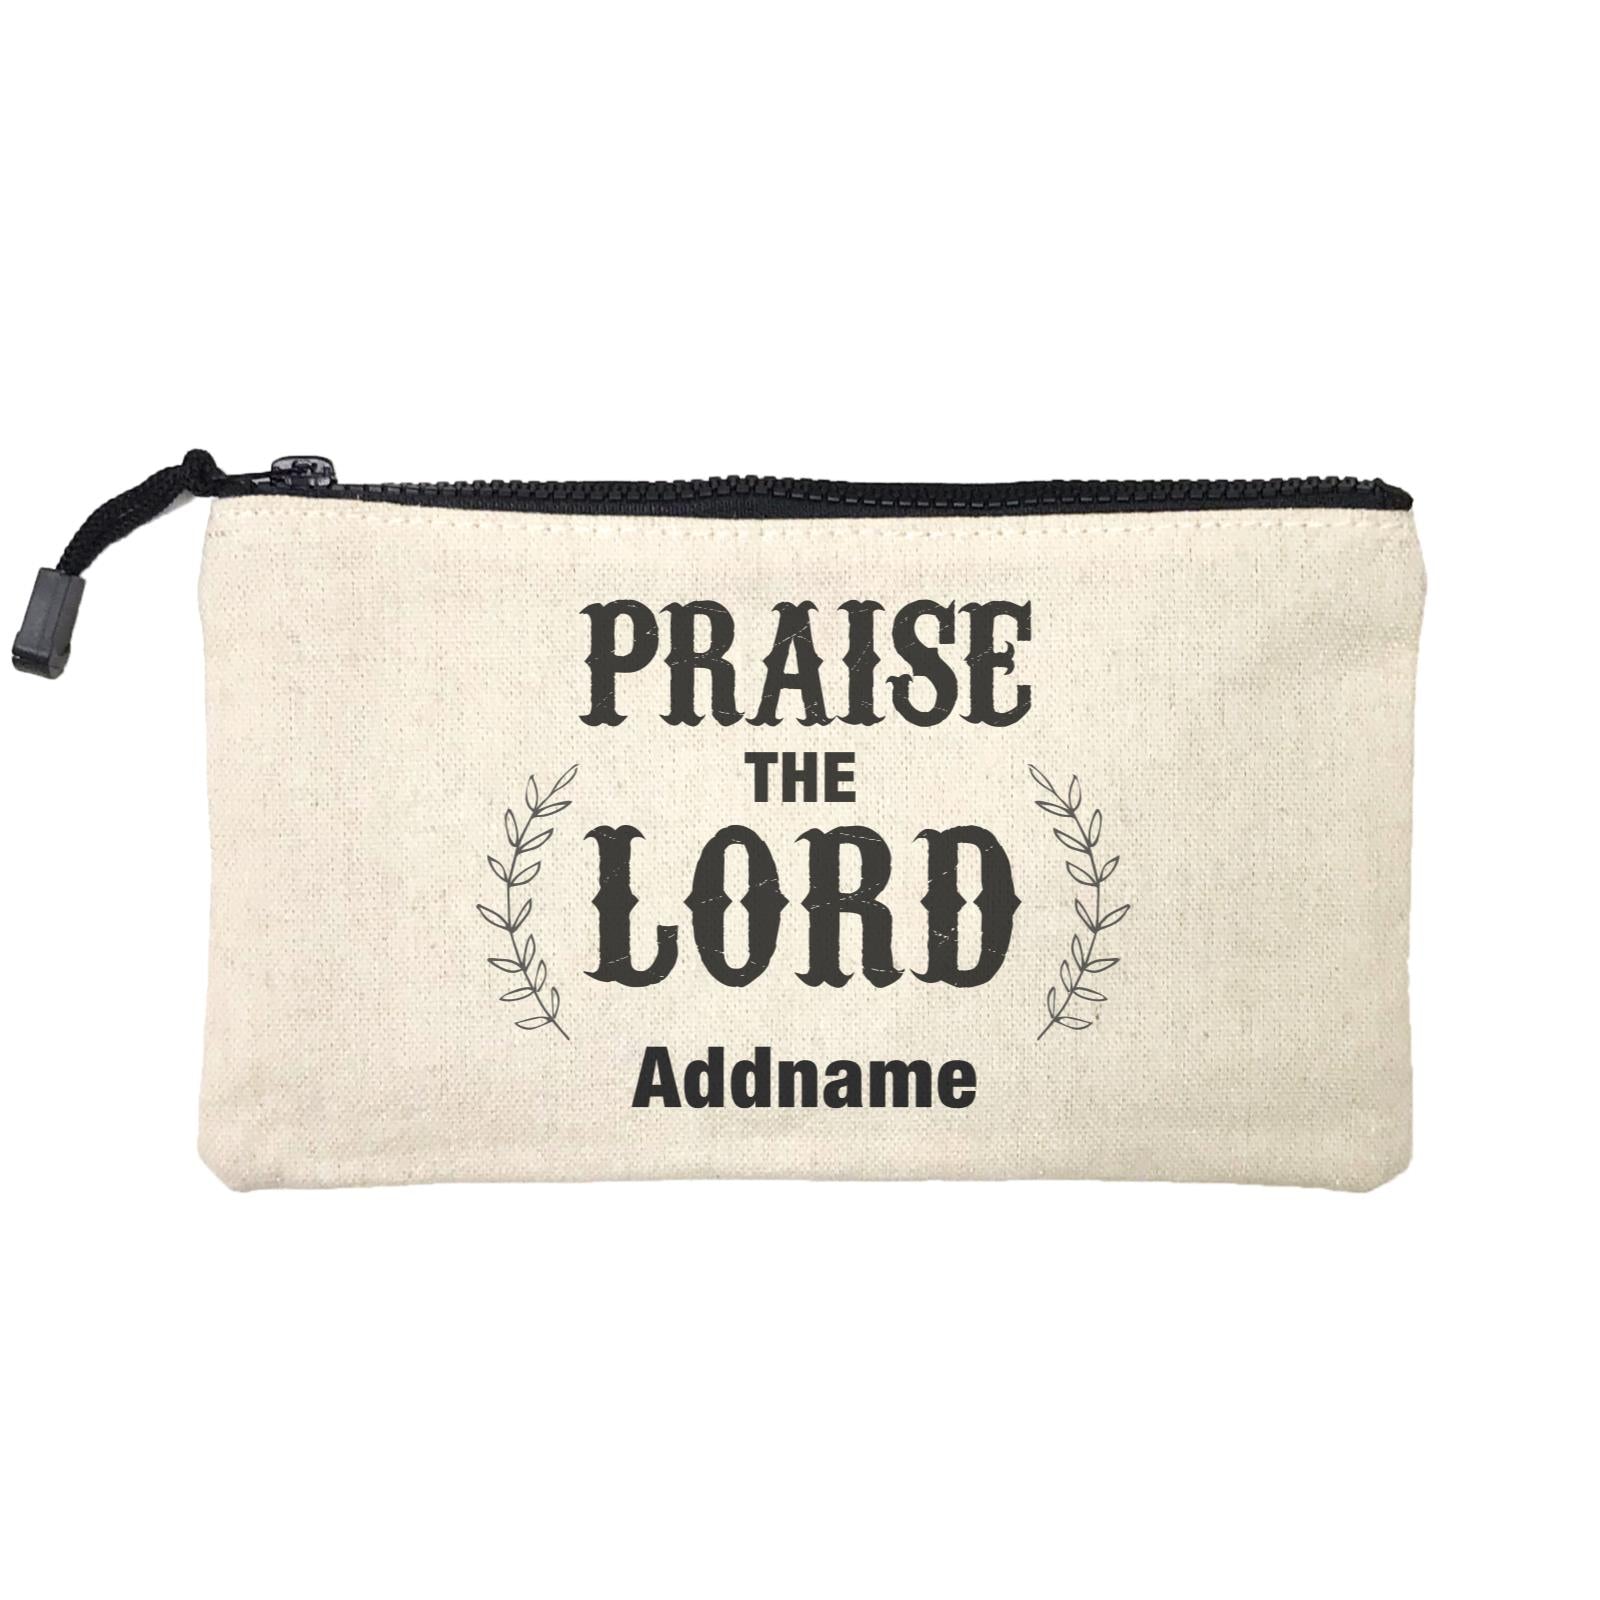 Christian Series Praise The Lord Addname Mini Accessories Stationery Pouch